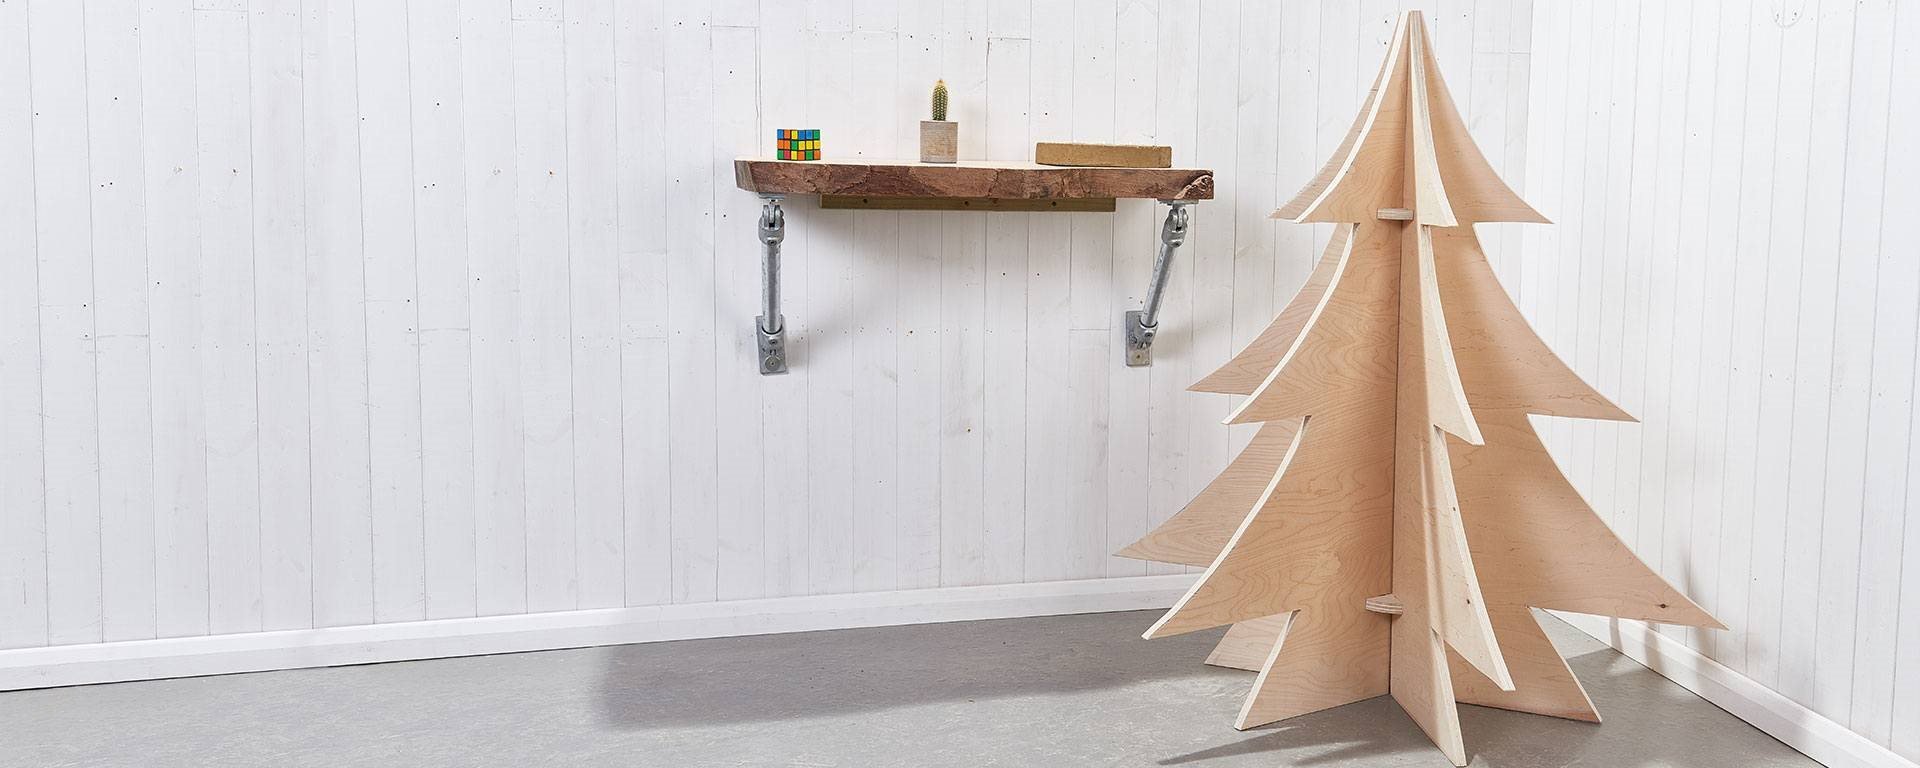 How to Make a Decorative Plywood Christmas Tree